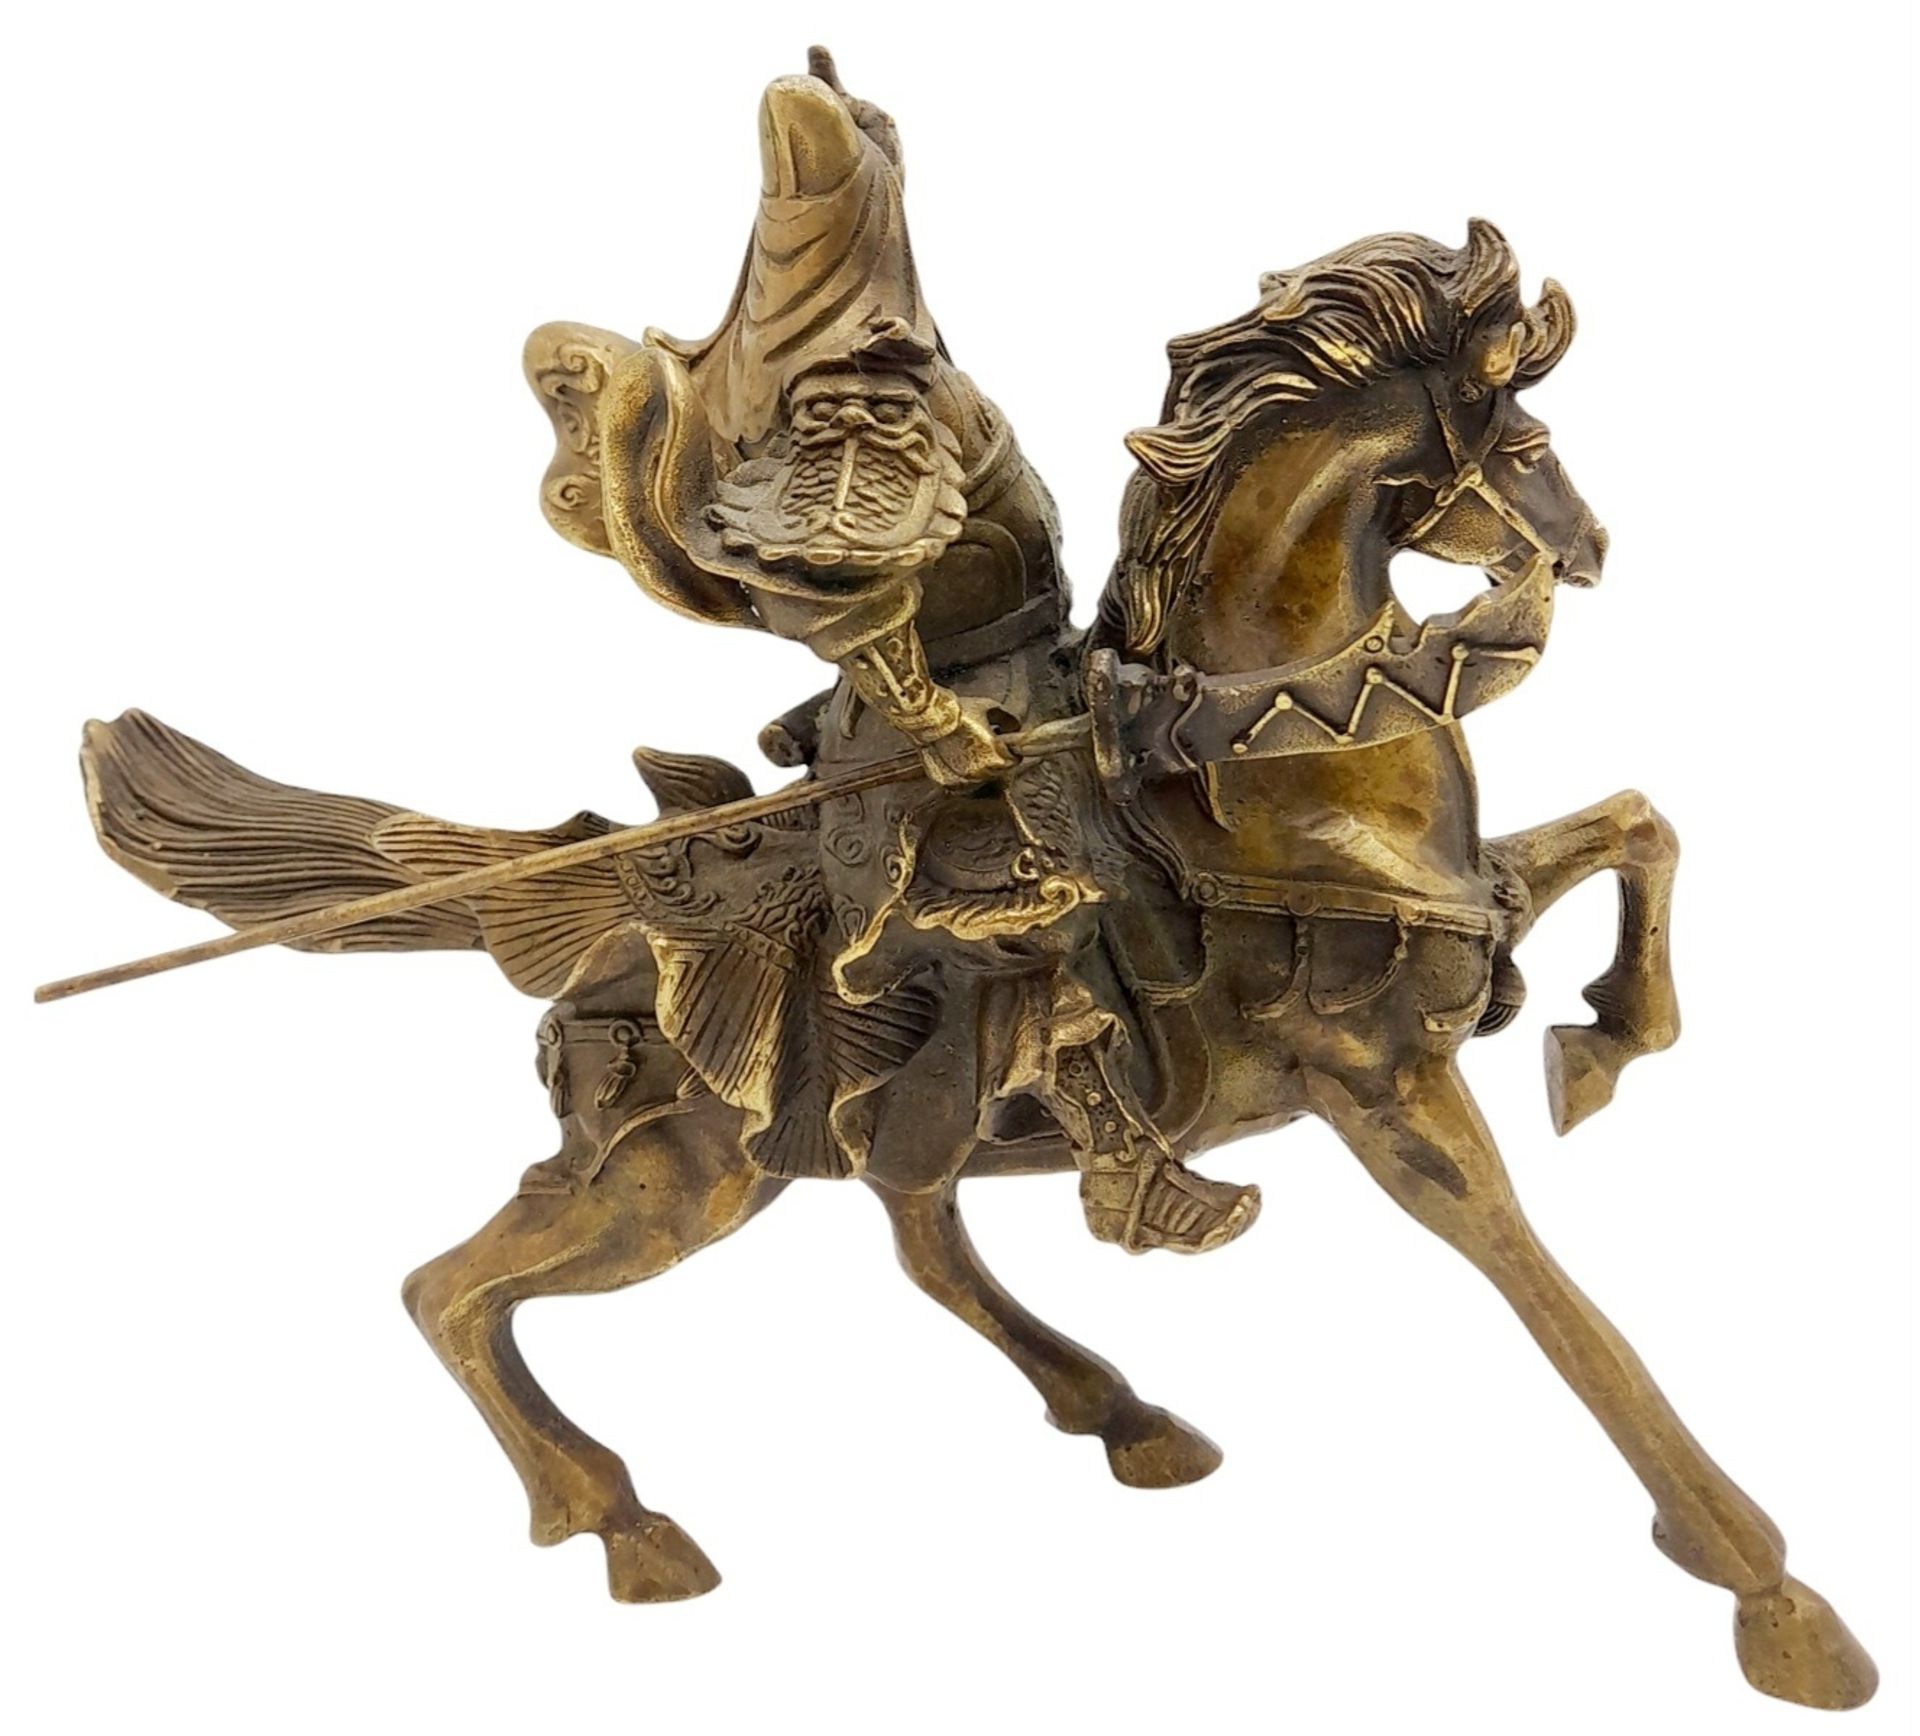 A Vintage Chinese Copper Guan Gong (God of war and wealth) on Horseback Statue. 23cm x 19cm tall. - Image 3 of 6